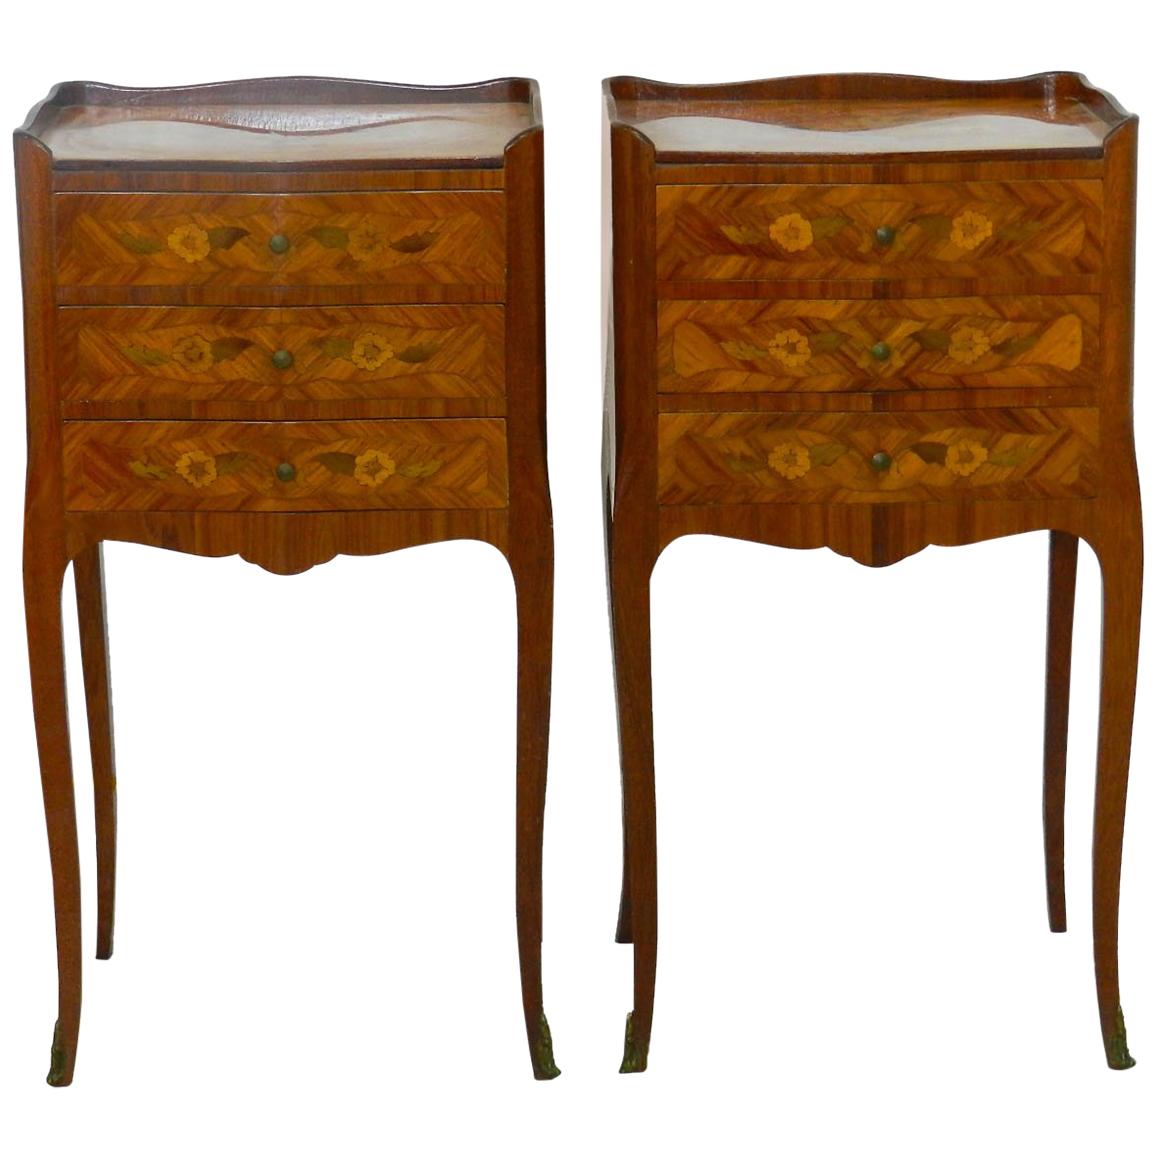 Pair of Nightstands French Bedside Tables Early 20th Century Louis Commodes